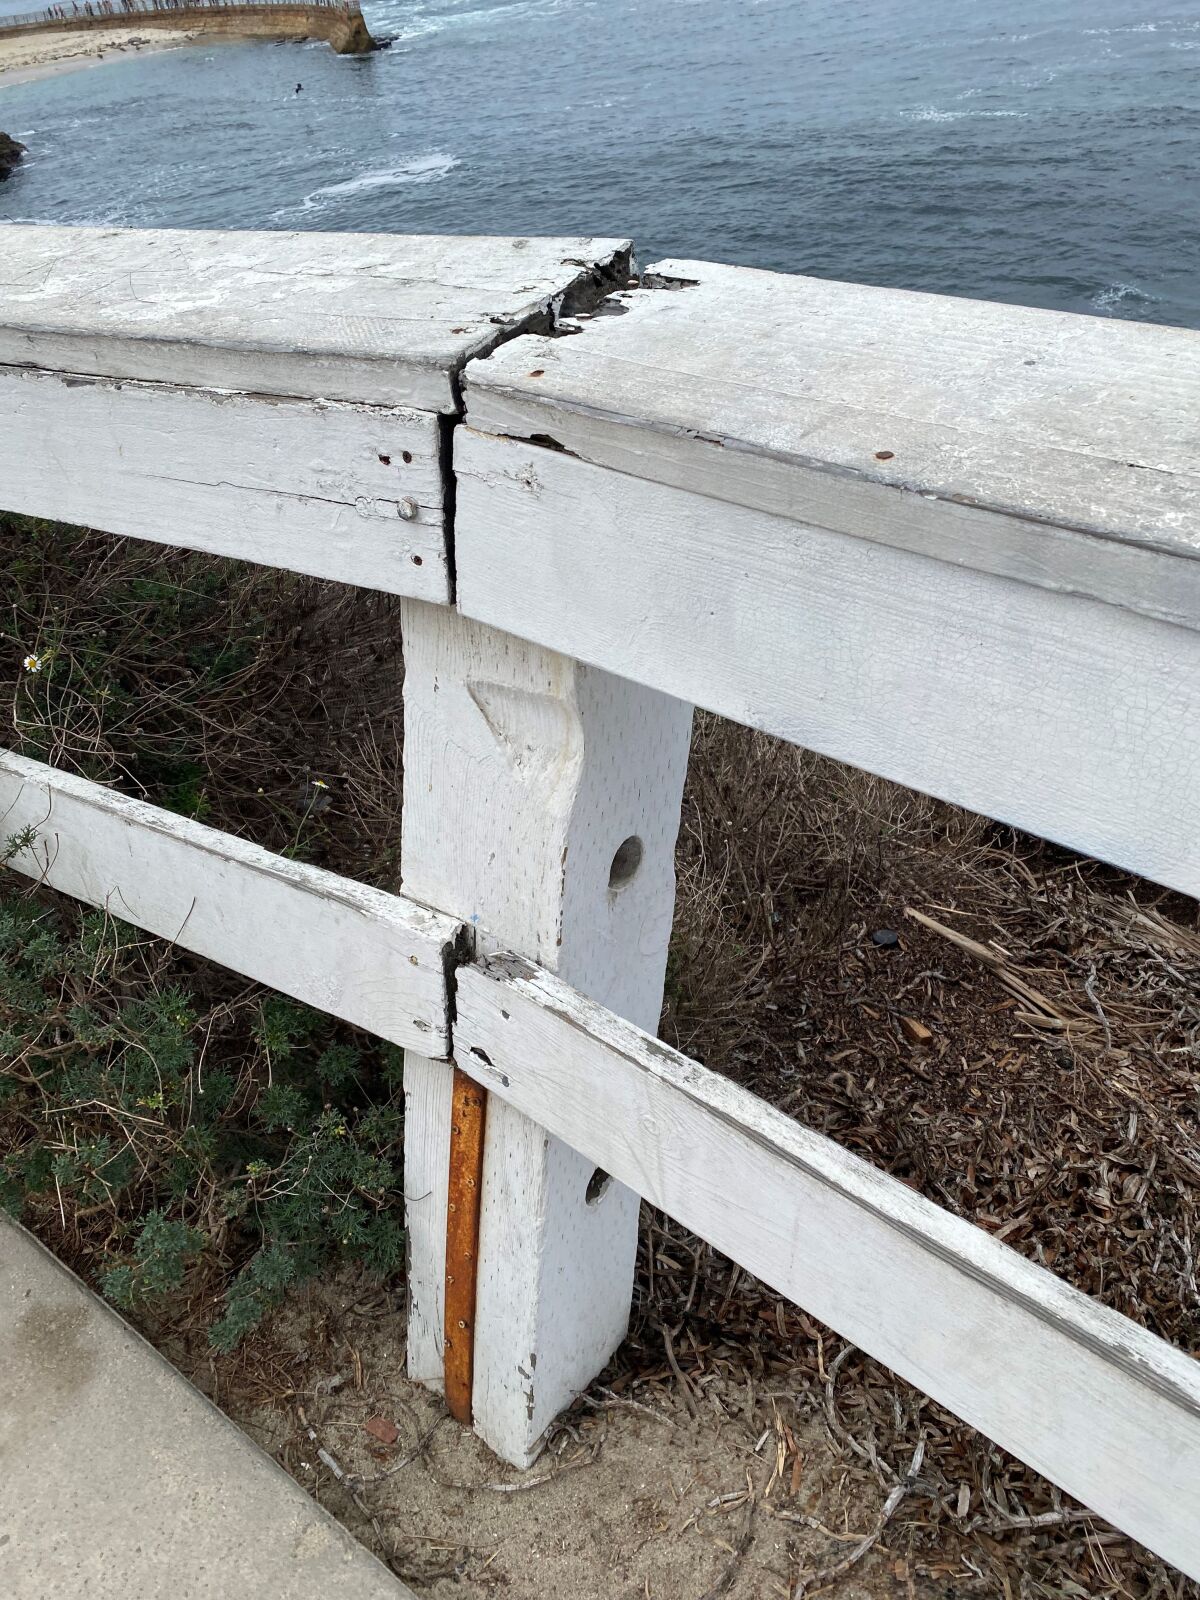 Some residents fear the fences along Scripps Park are losing their stability and could pose a safety hazard.